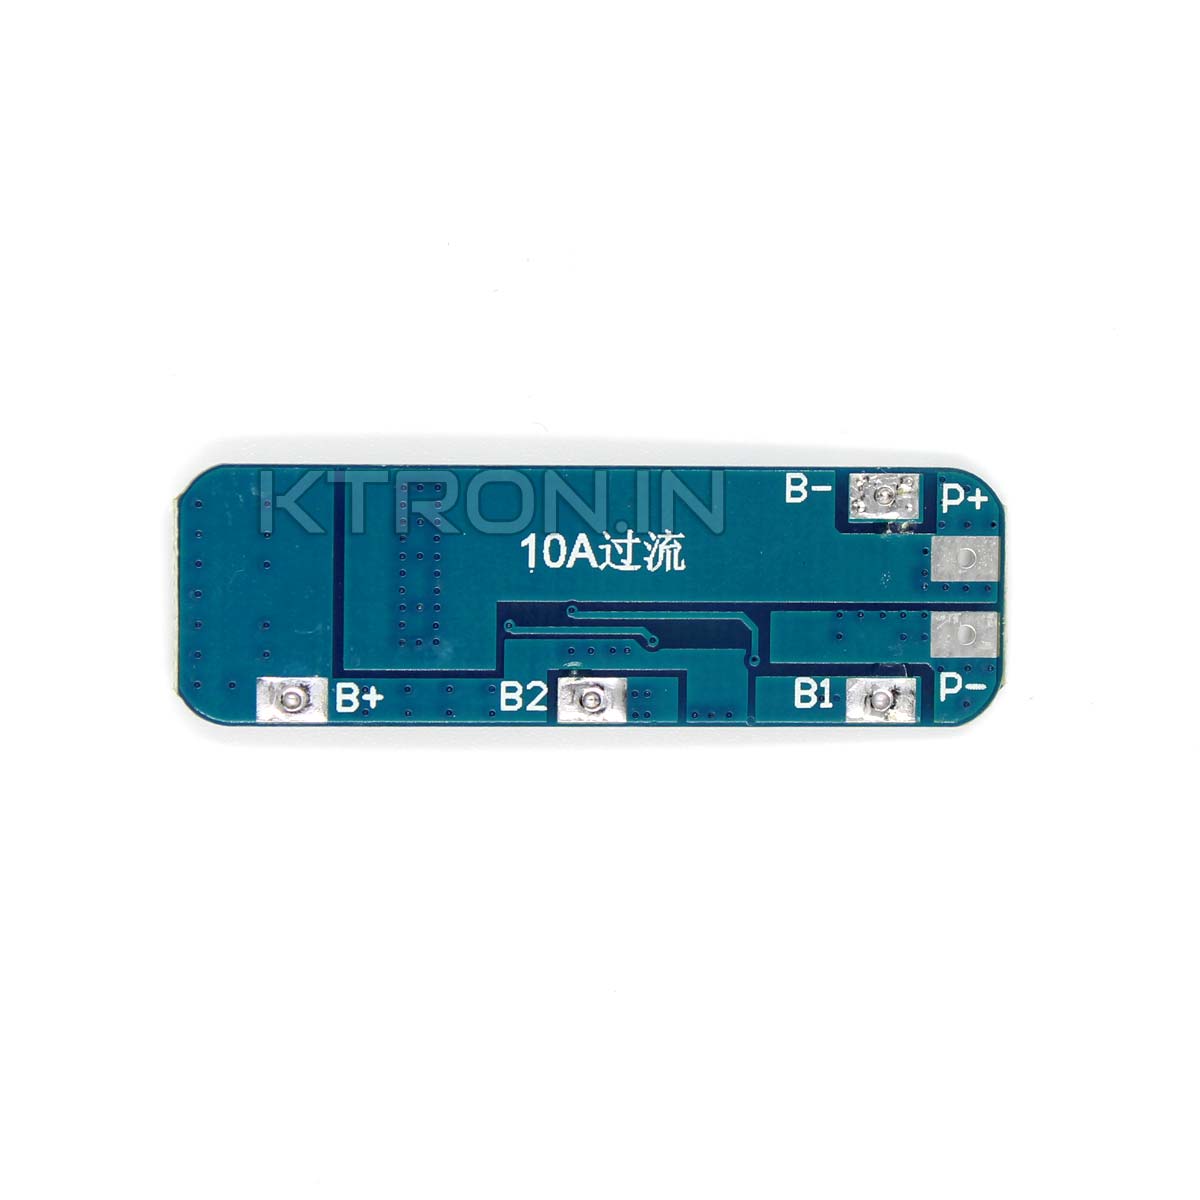 Buy 3S 10A Lithium Ion BMS Module - For 11.1V Battery - KTRON India